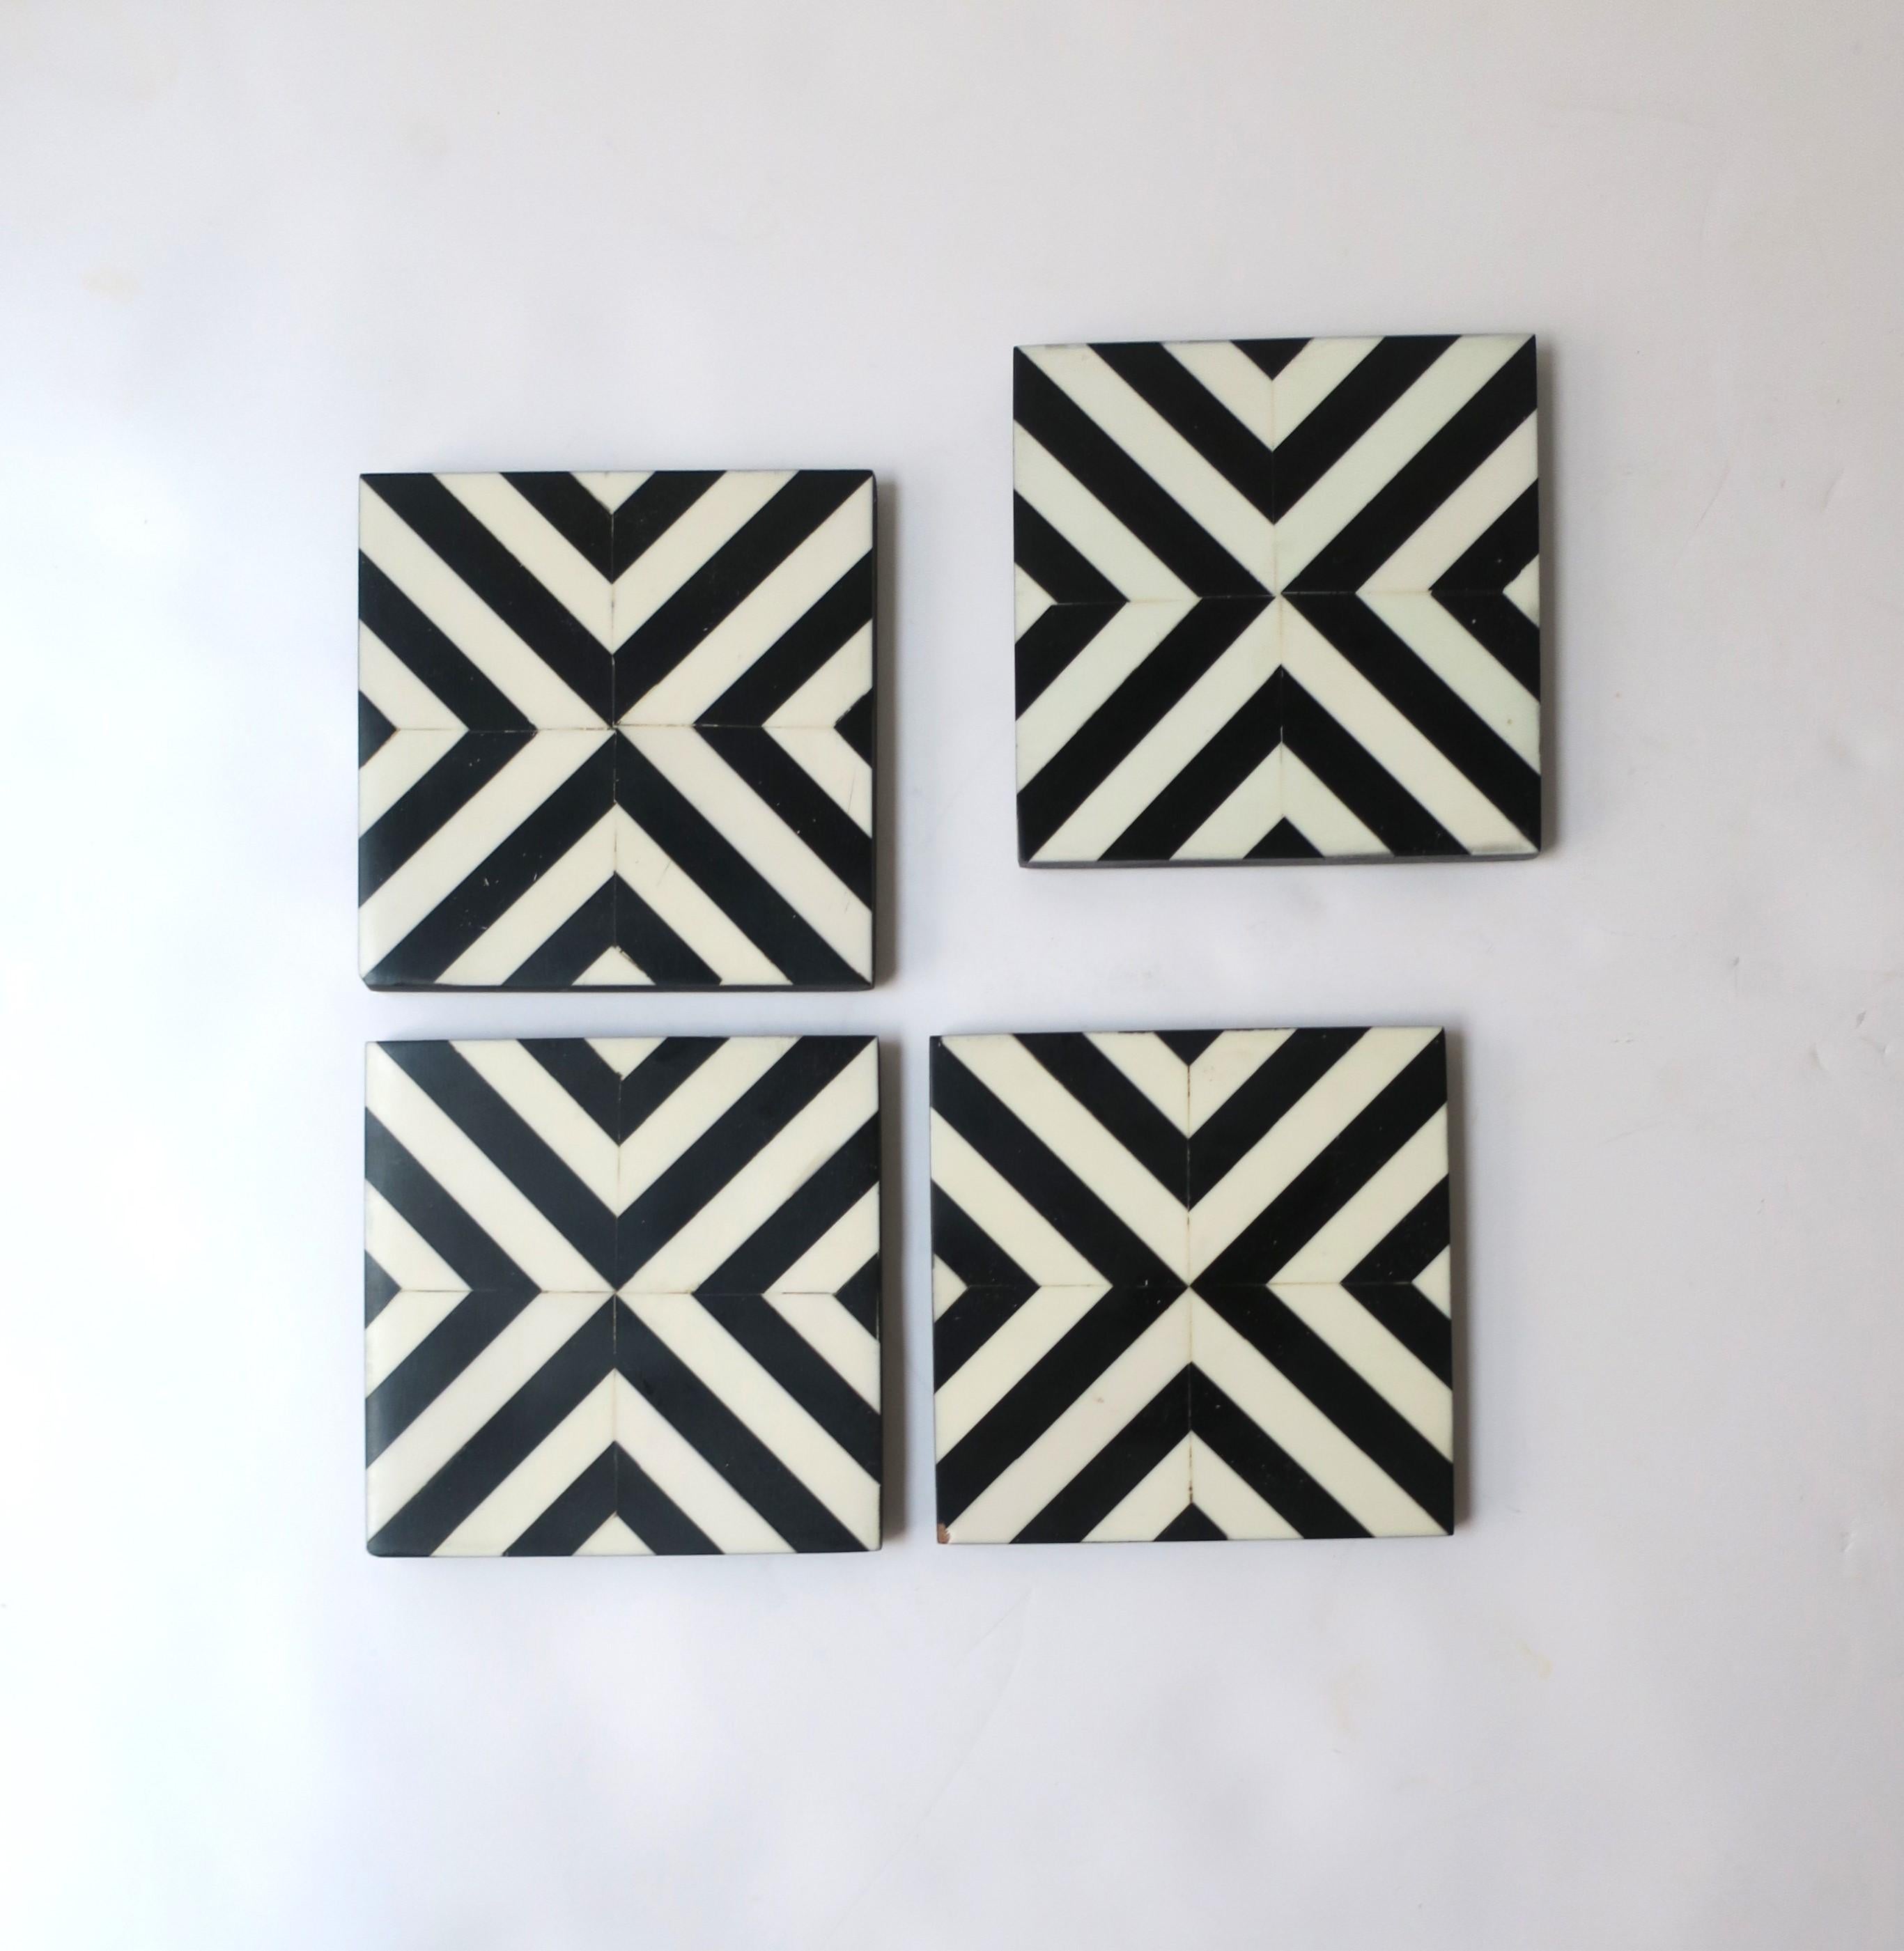 A set of four (4) black and white resin cocktail drinks coasters with a chevron pattern. Coasters are great for any drink including Champagne, wine, water, a cocktail, etc., and are essential for protecting furniture tops. Dimensions: 3.94